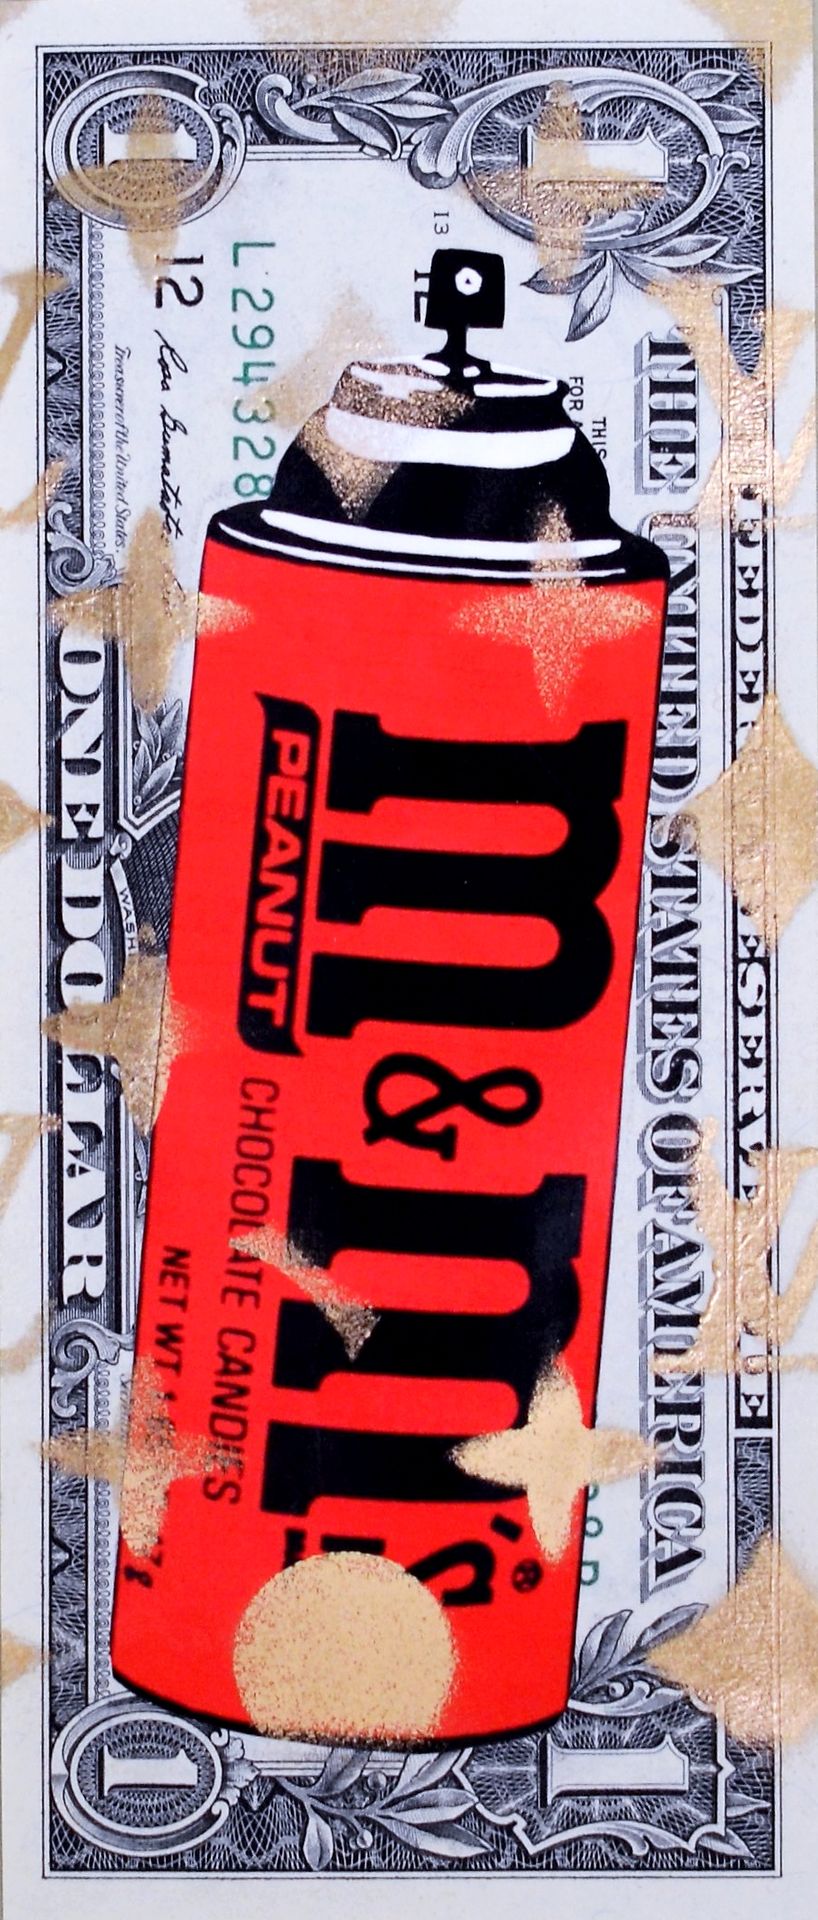 Death NYC Death NYC

M&M Spray 2013

Collage and mixed media on banknote

Unique&hellip;